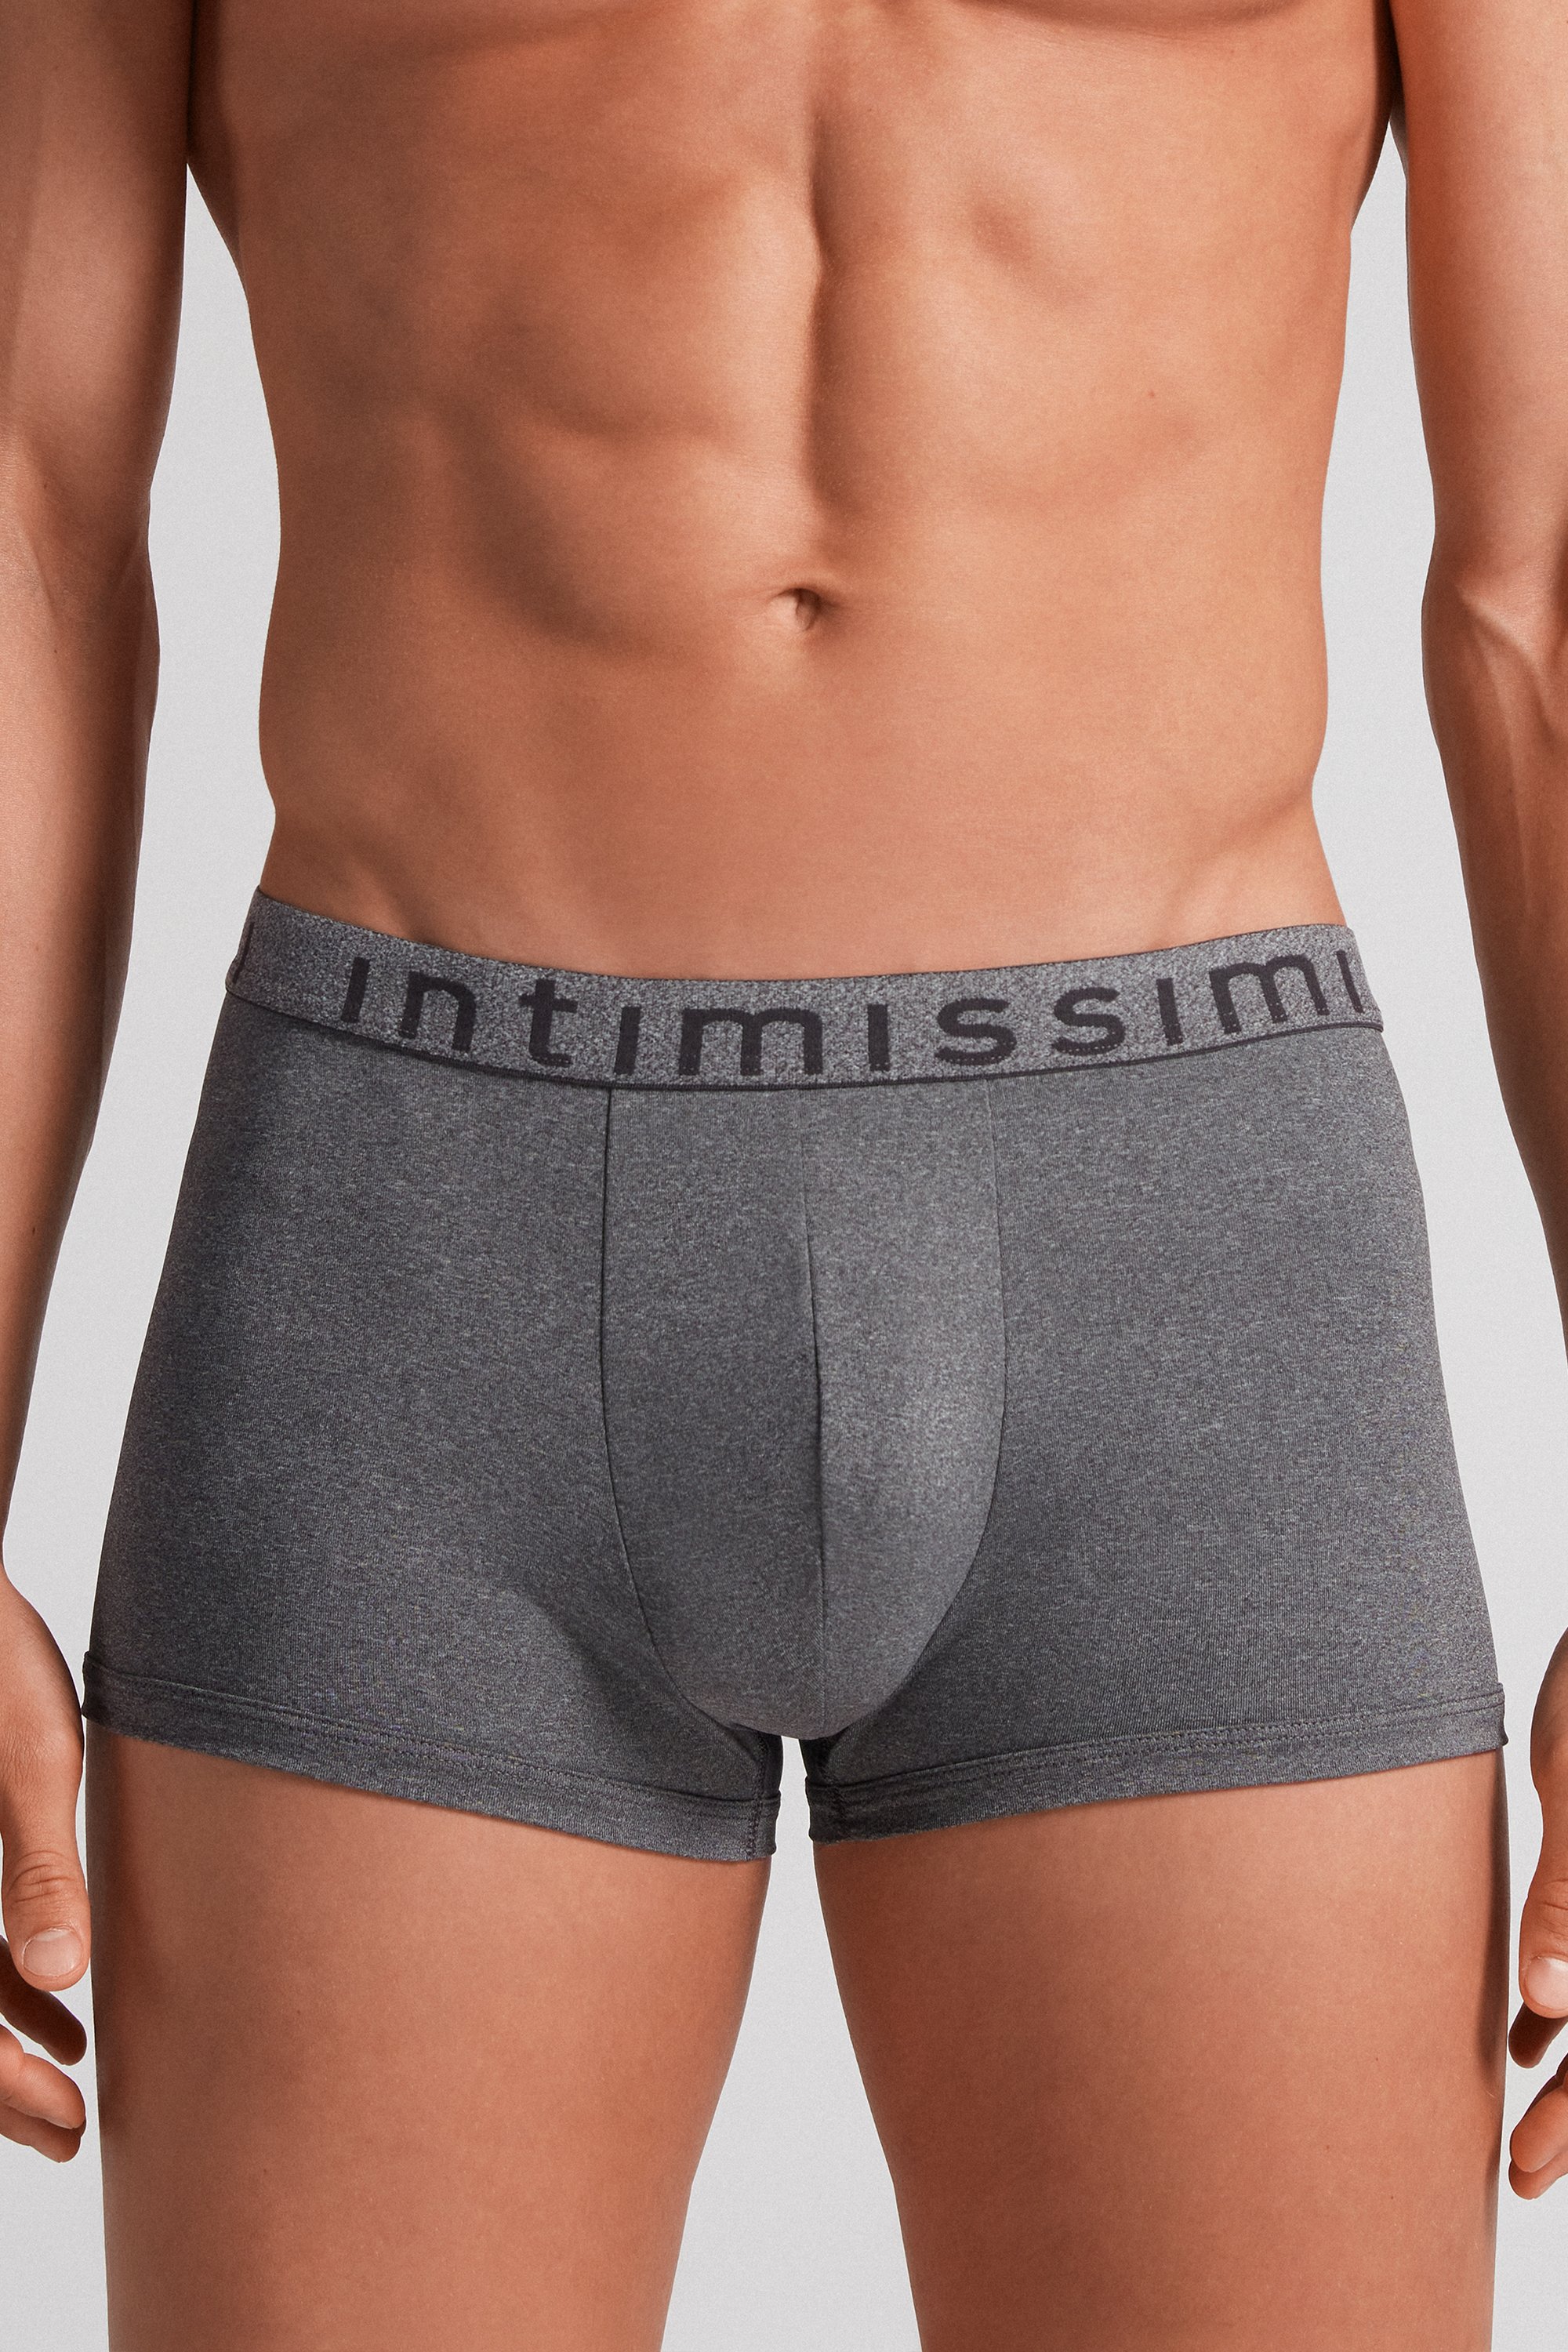 Intimissimi logo tag editorial photography. Image of underwear - 127486272